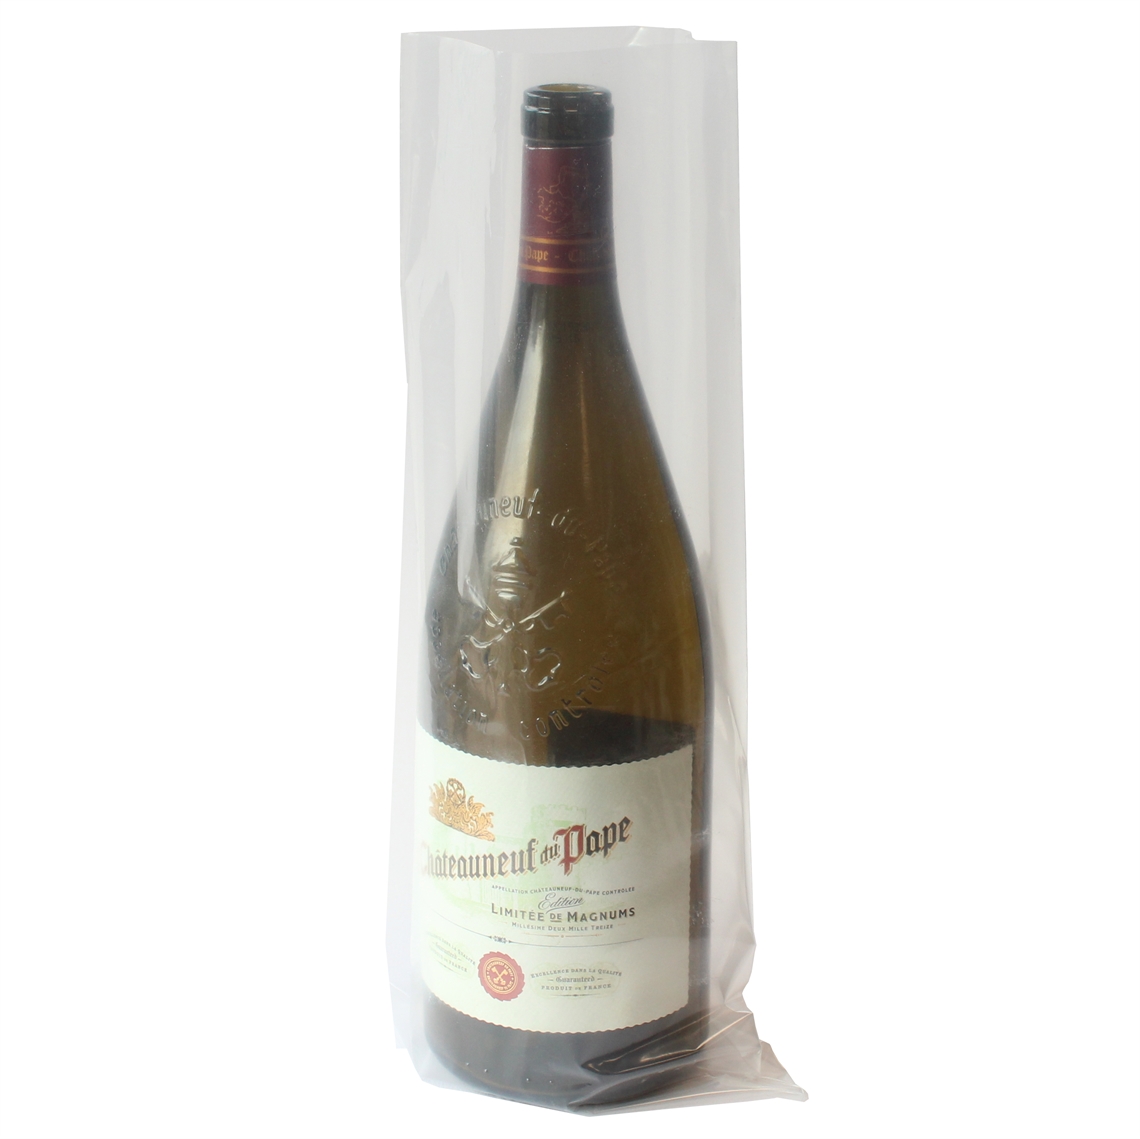 View more fondis from our Wine Bottle Cellar Sleeves range